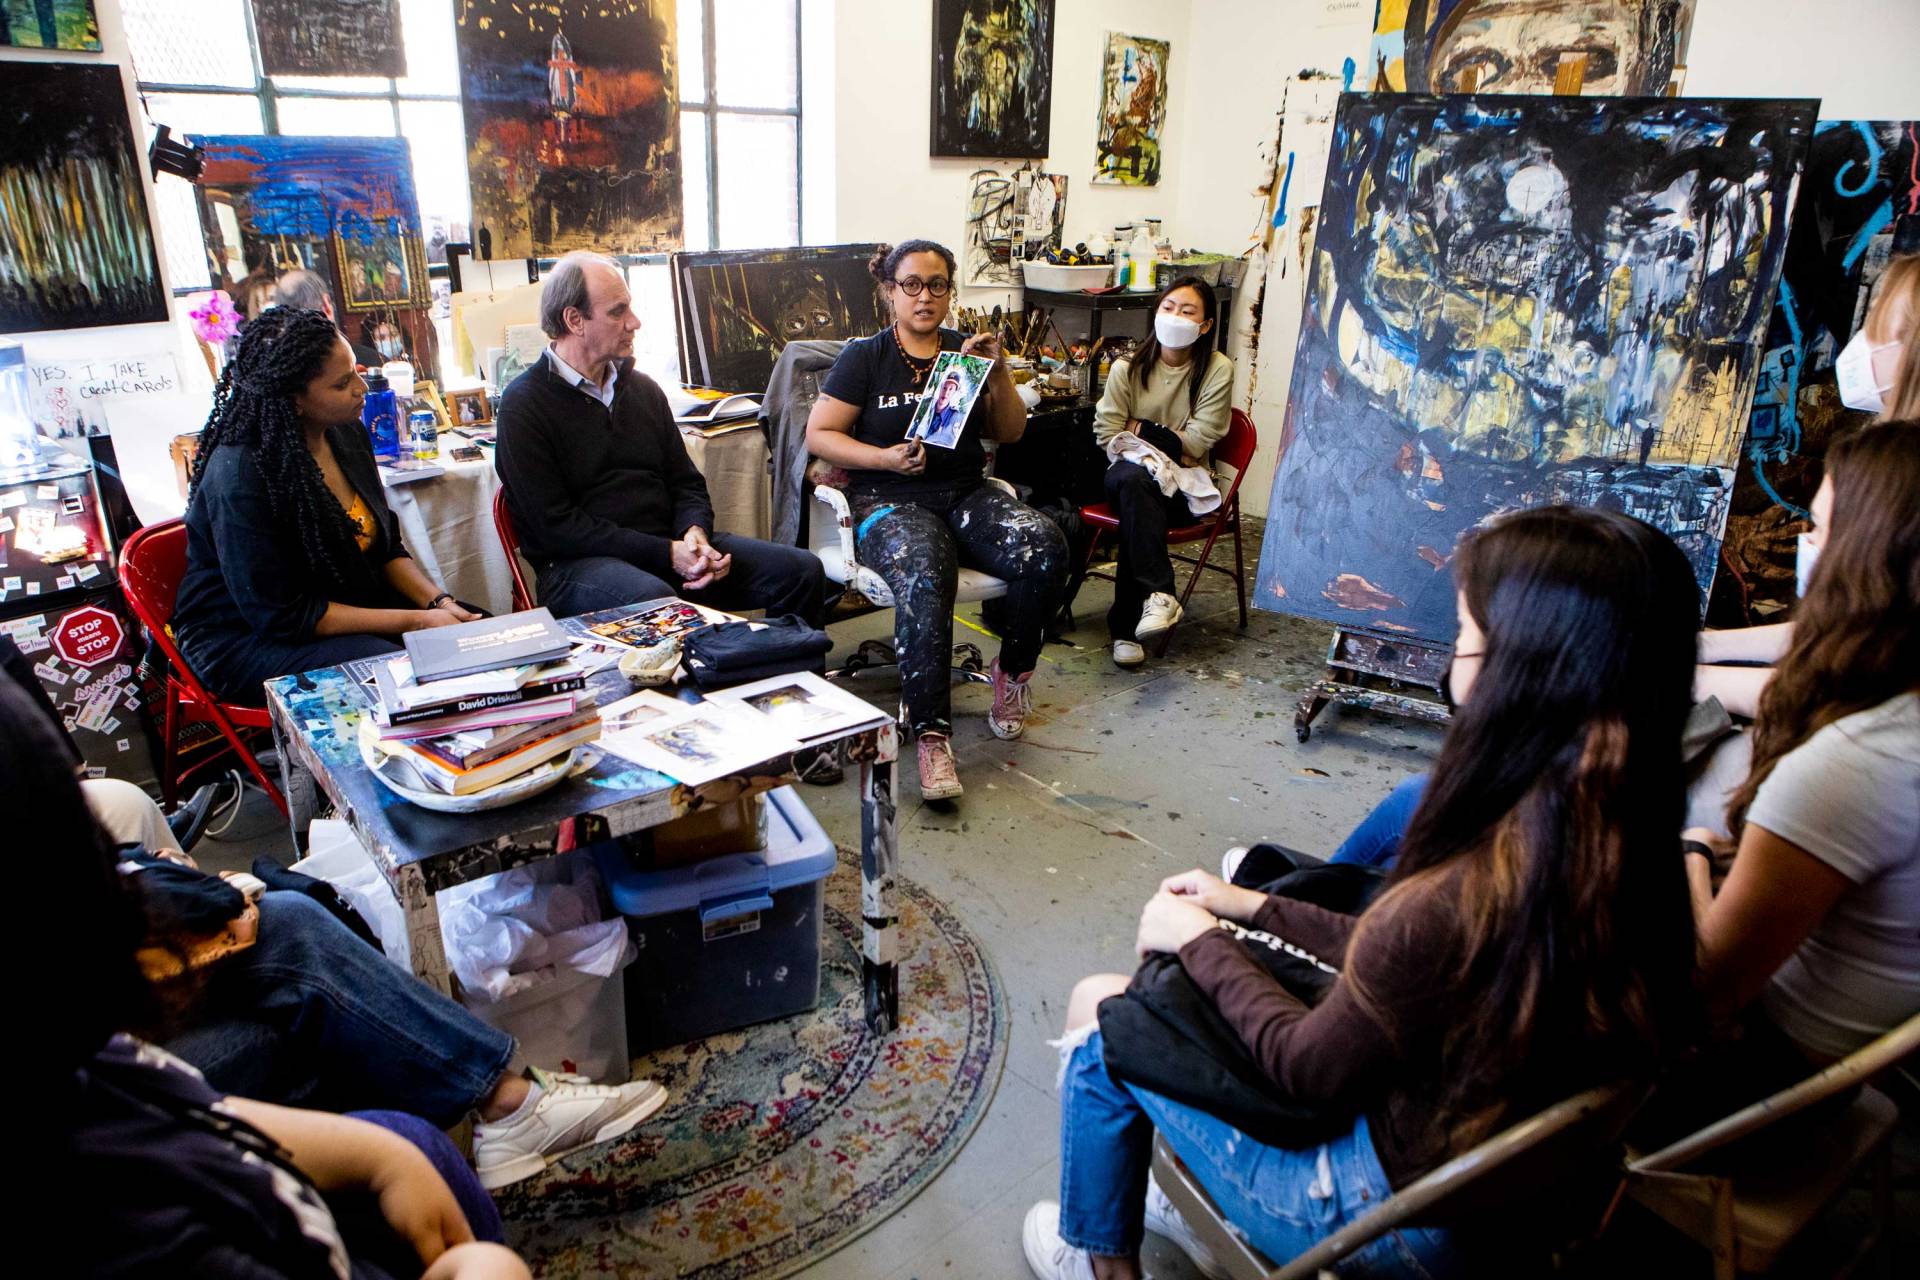 A painter presents her work surrounded by students and professors